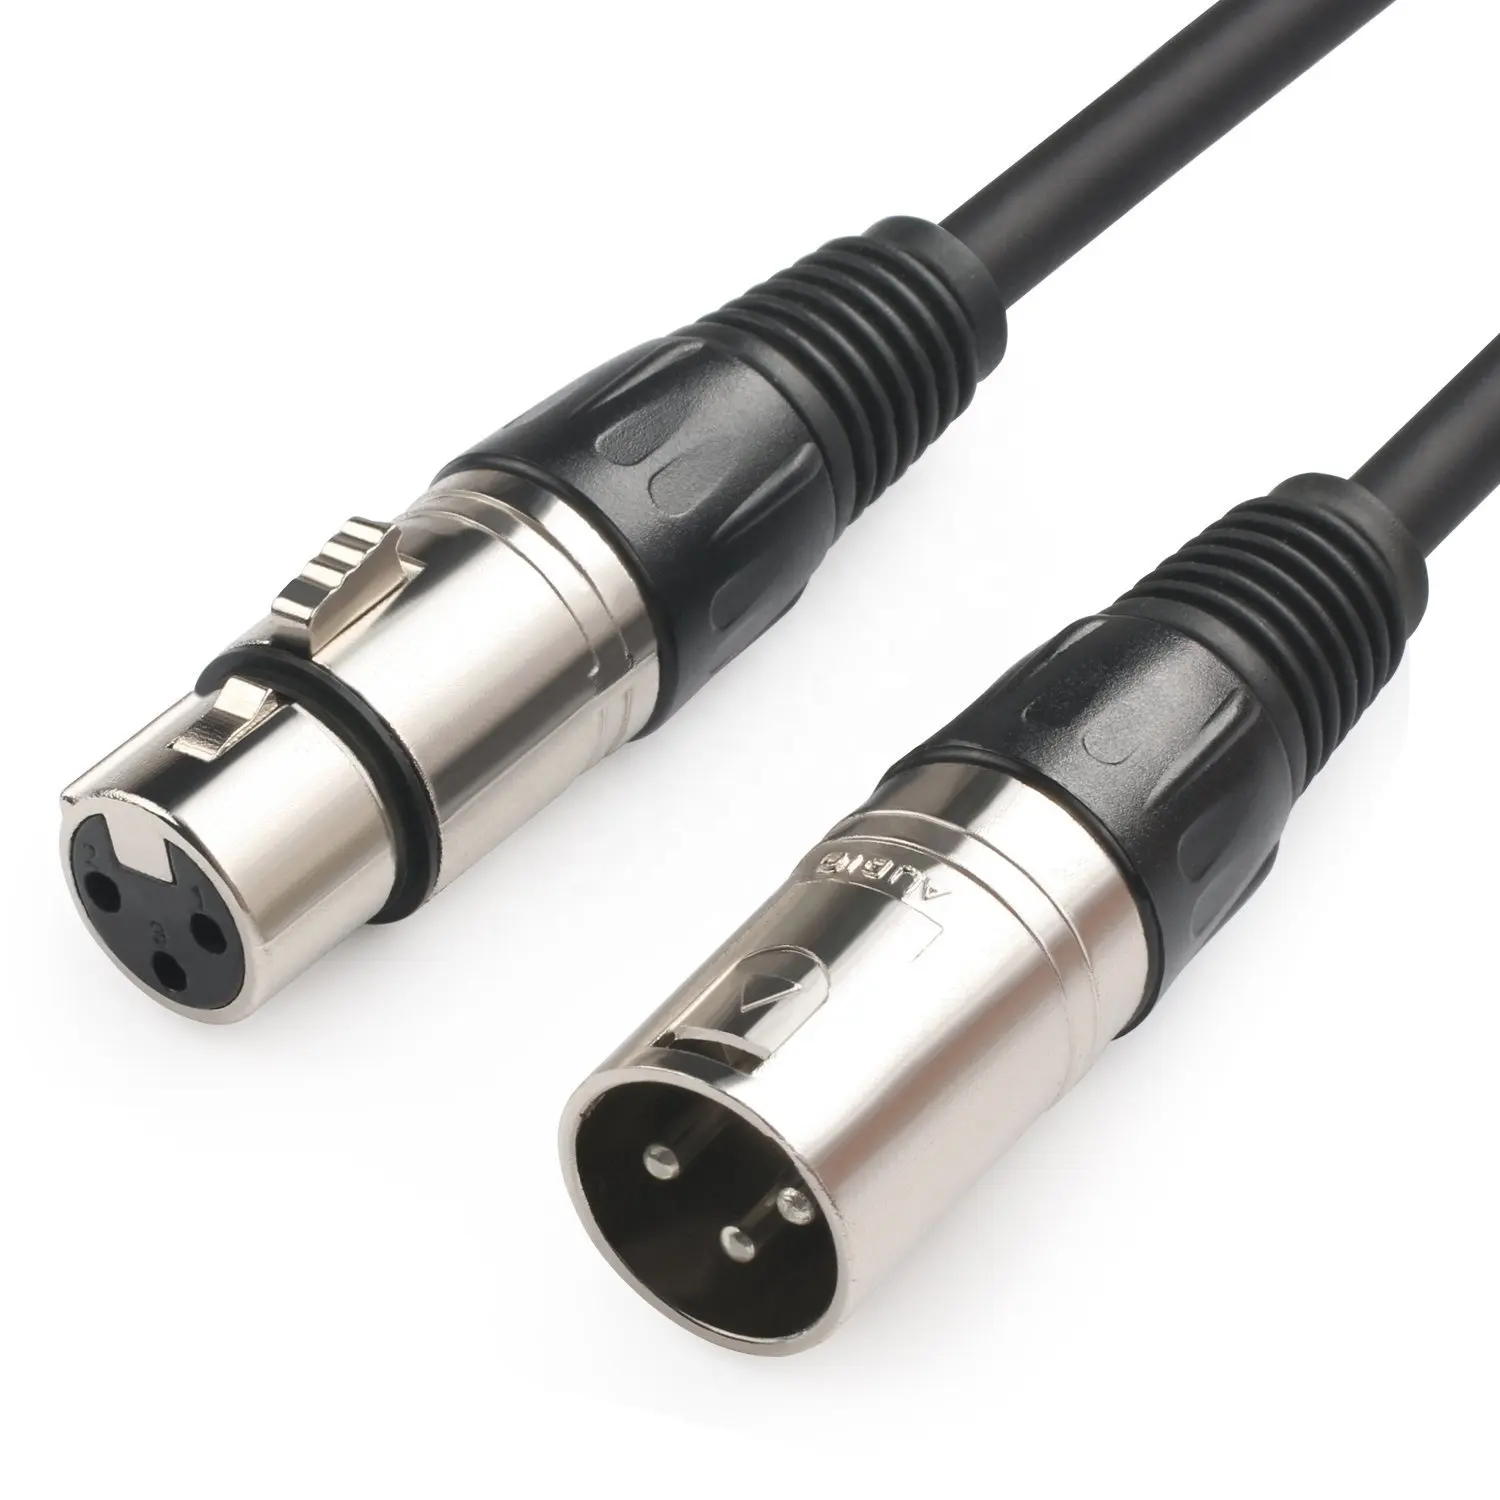 Balanced XLR Cable 3 ft Premium Series Professional Microphone Cable Powered Speakers and Other Pro Devices Cable Black